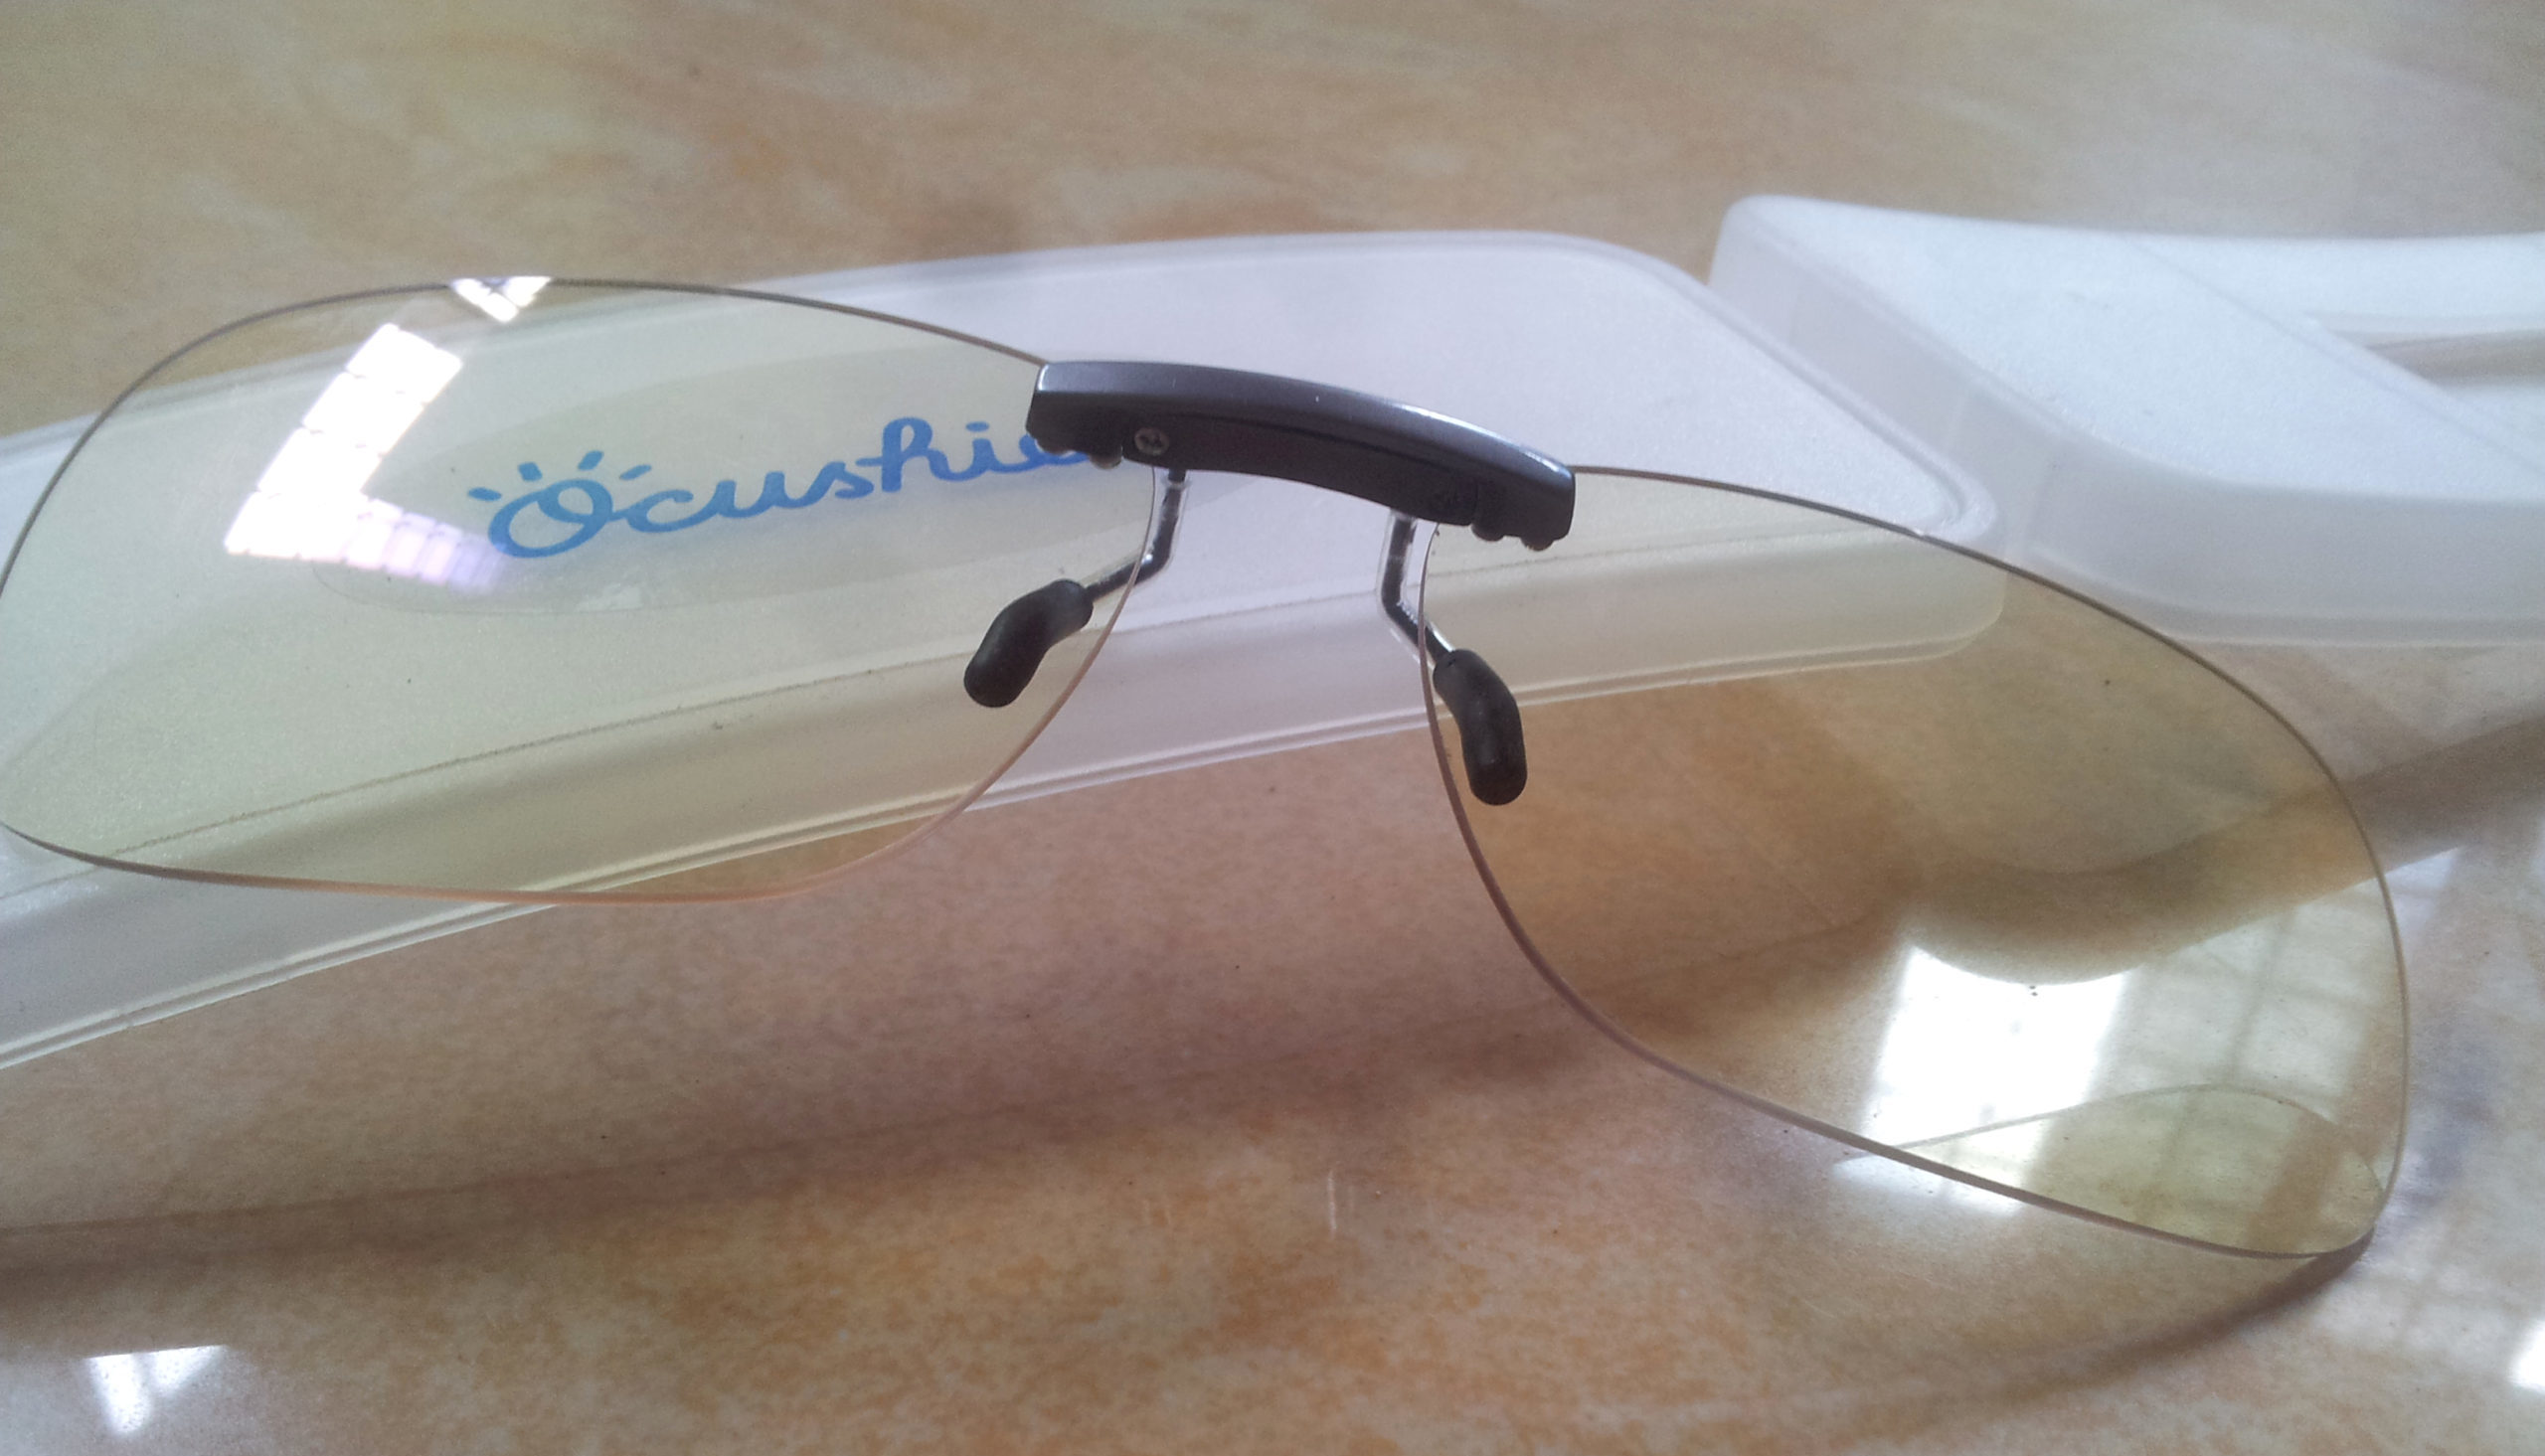 You are currently viewing Brillen-Test Ocushield Clip on Anti blue light glasses